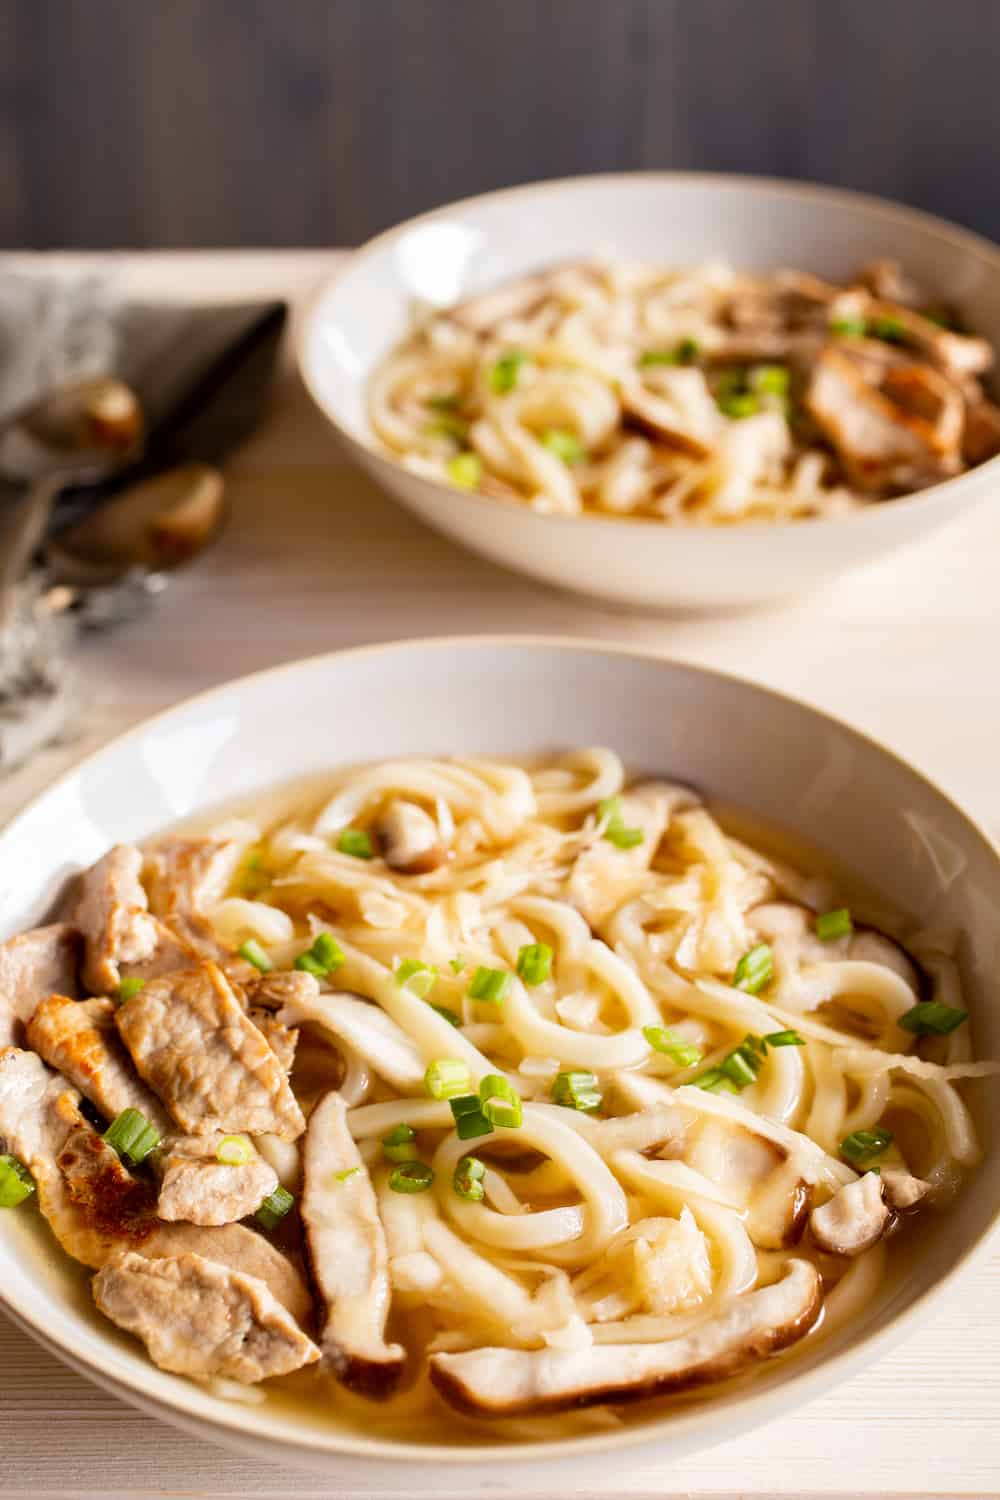 Miso Udon Soup with Shiitake Mushrooms